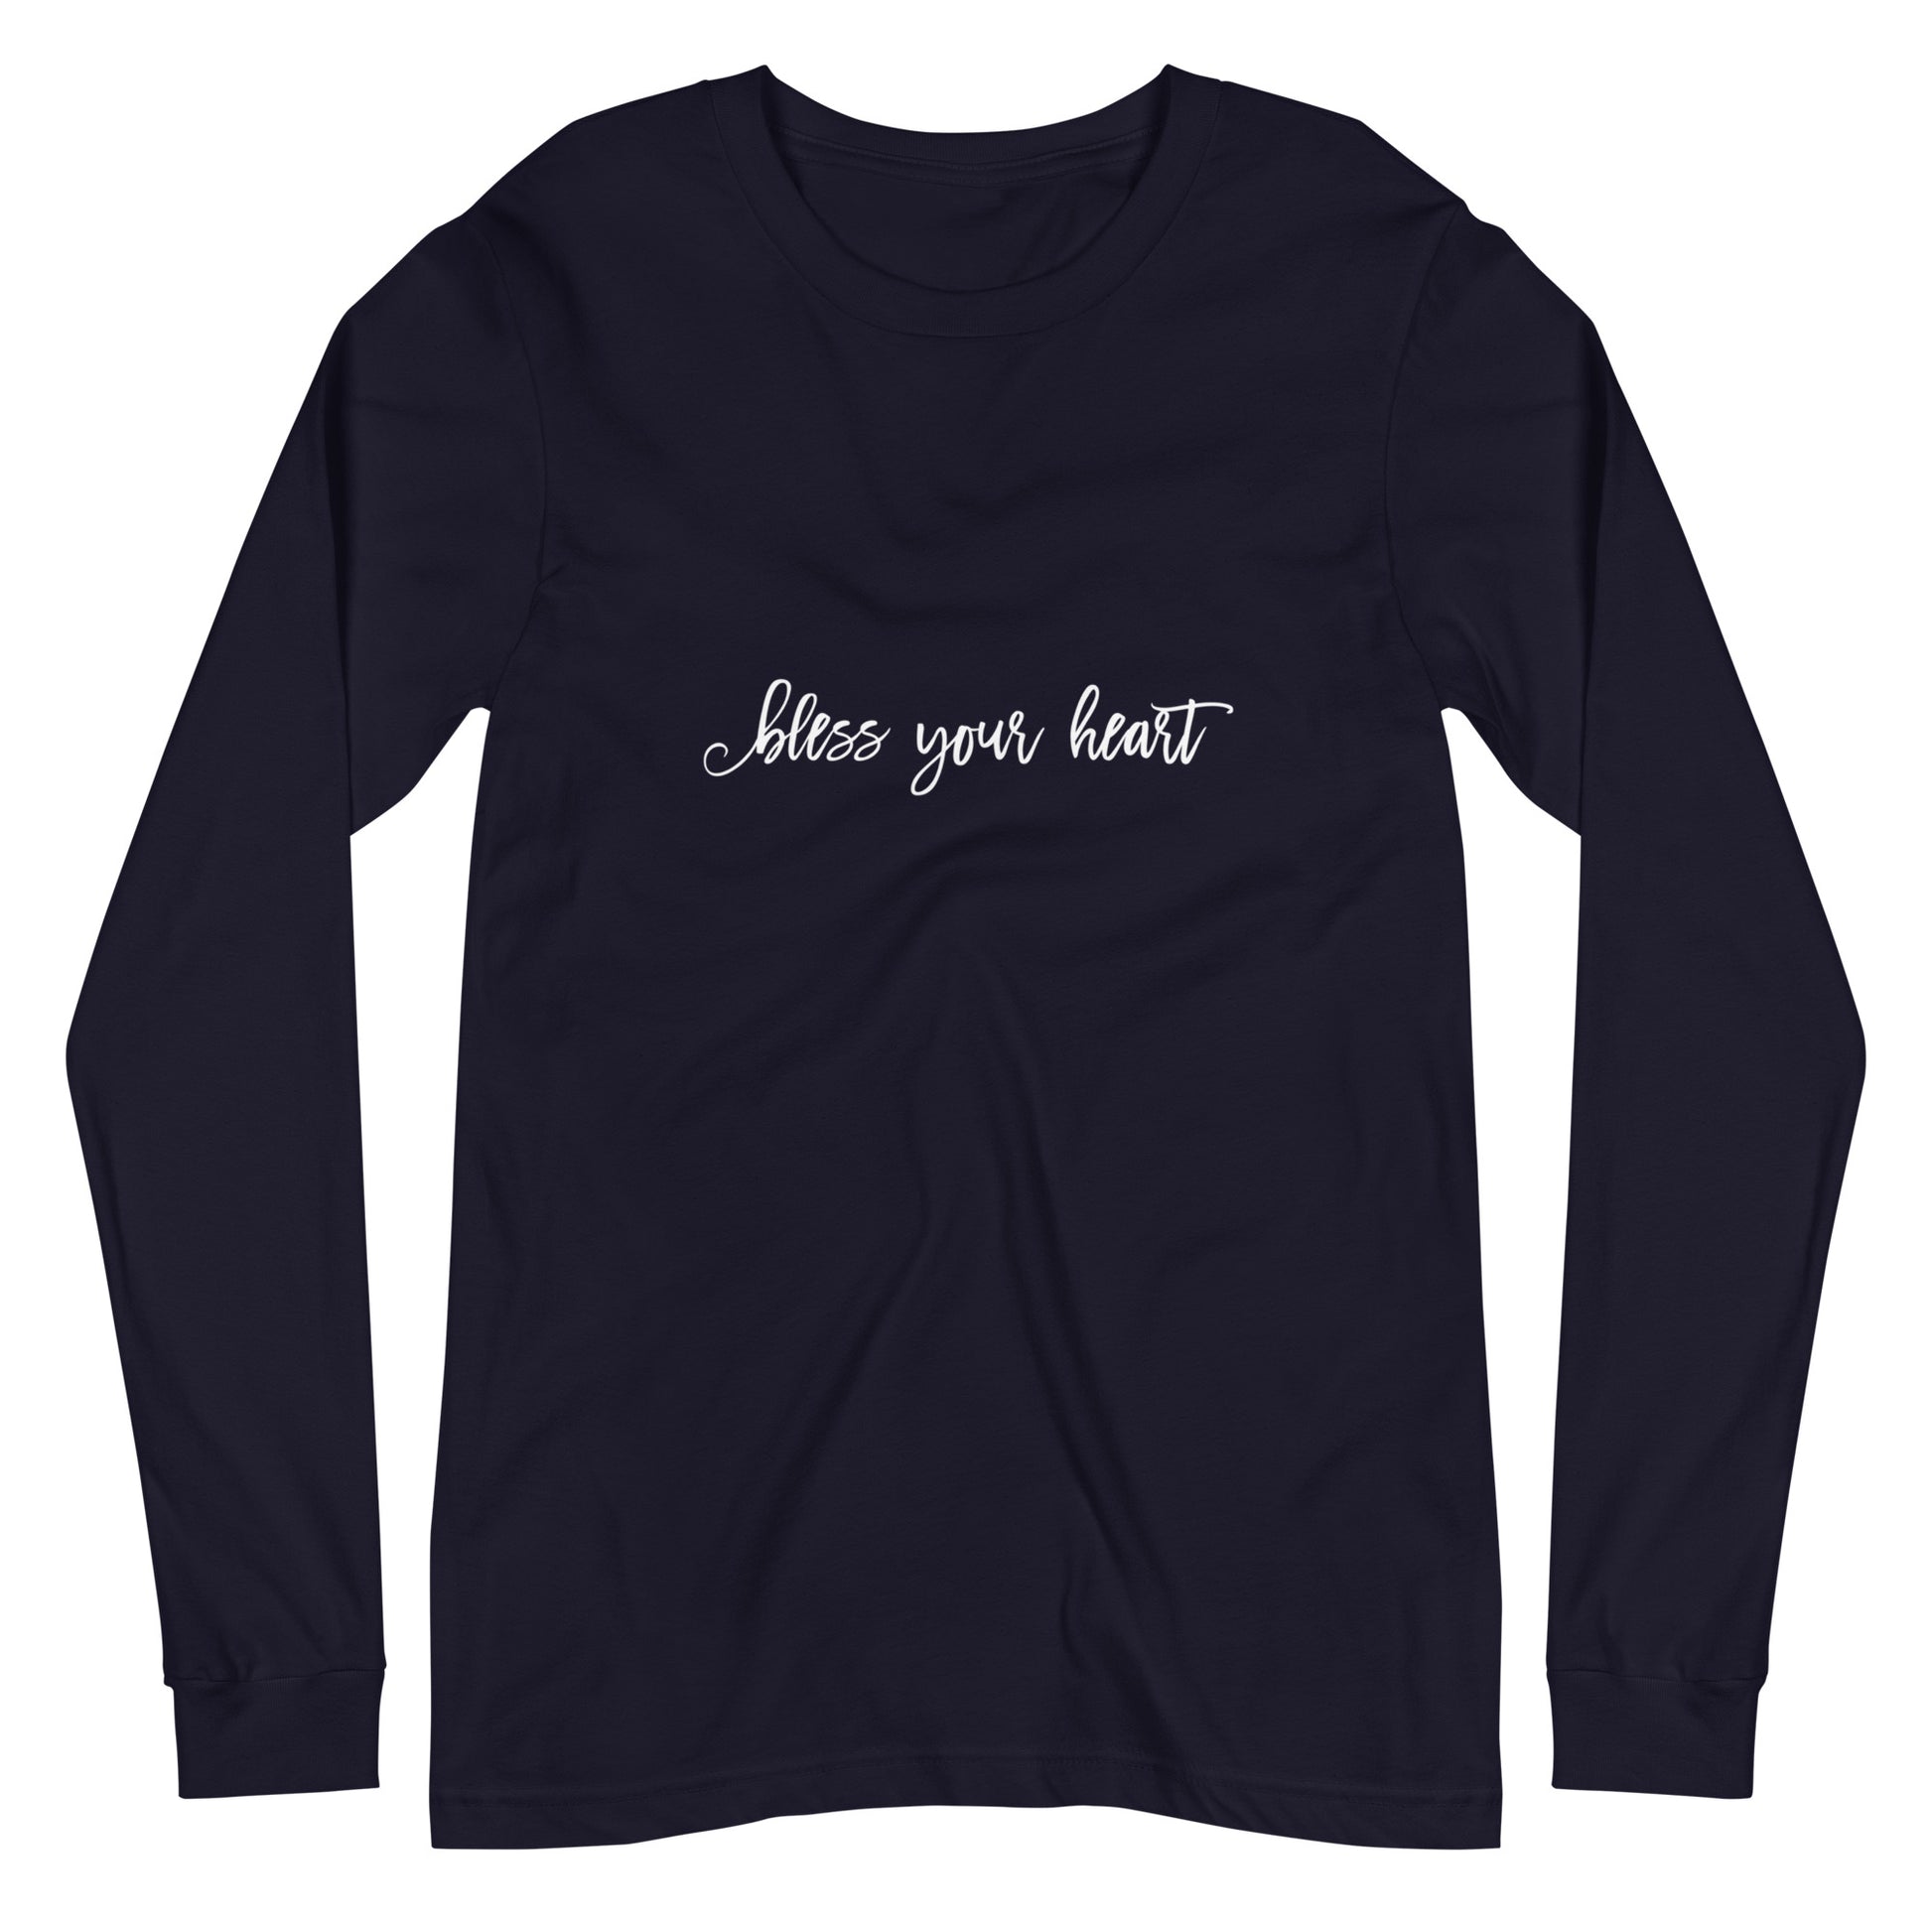 Navy long-sleeve t-shirt with white graphic in an excessively twee font: "bless your heart"